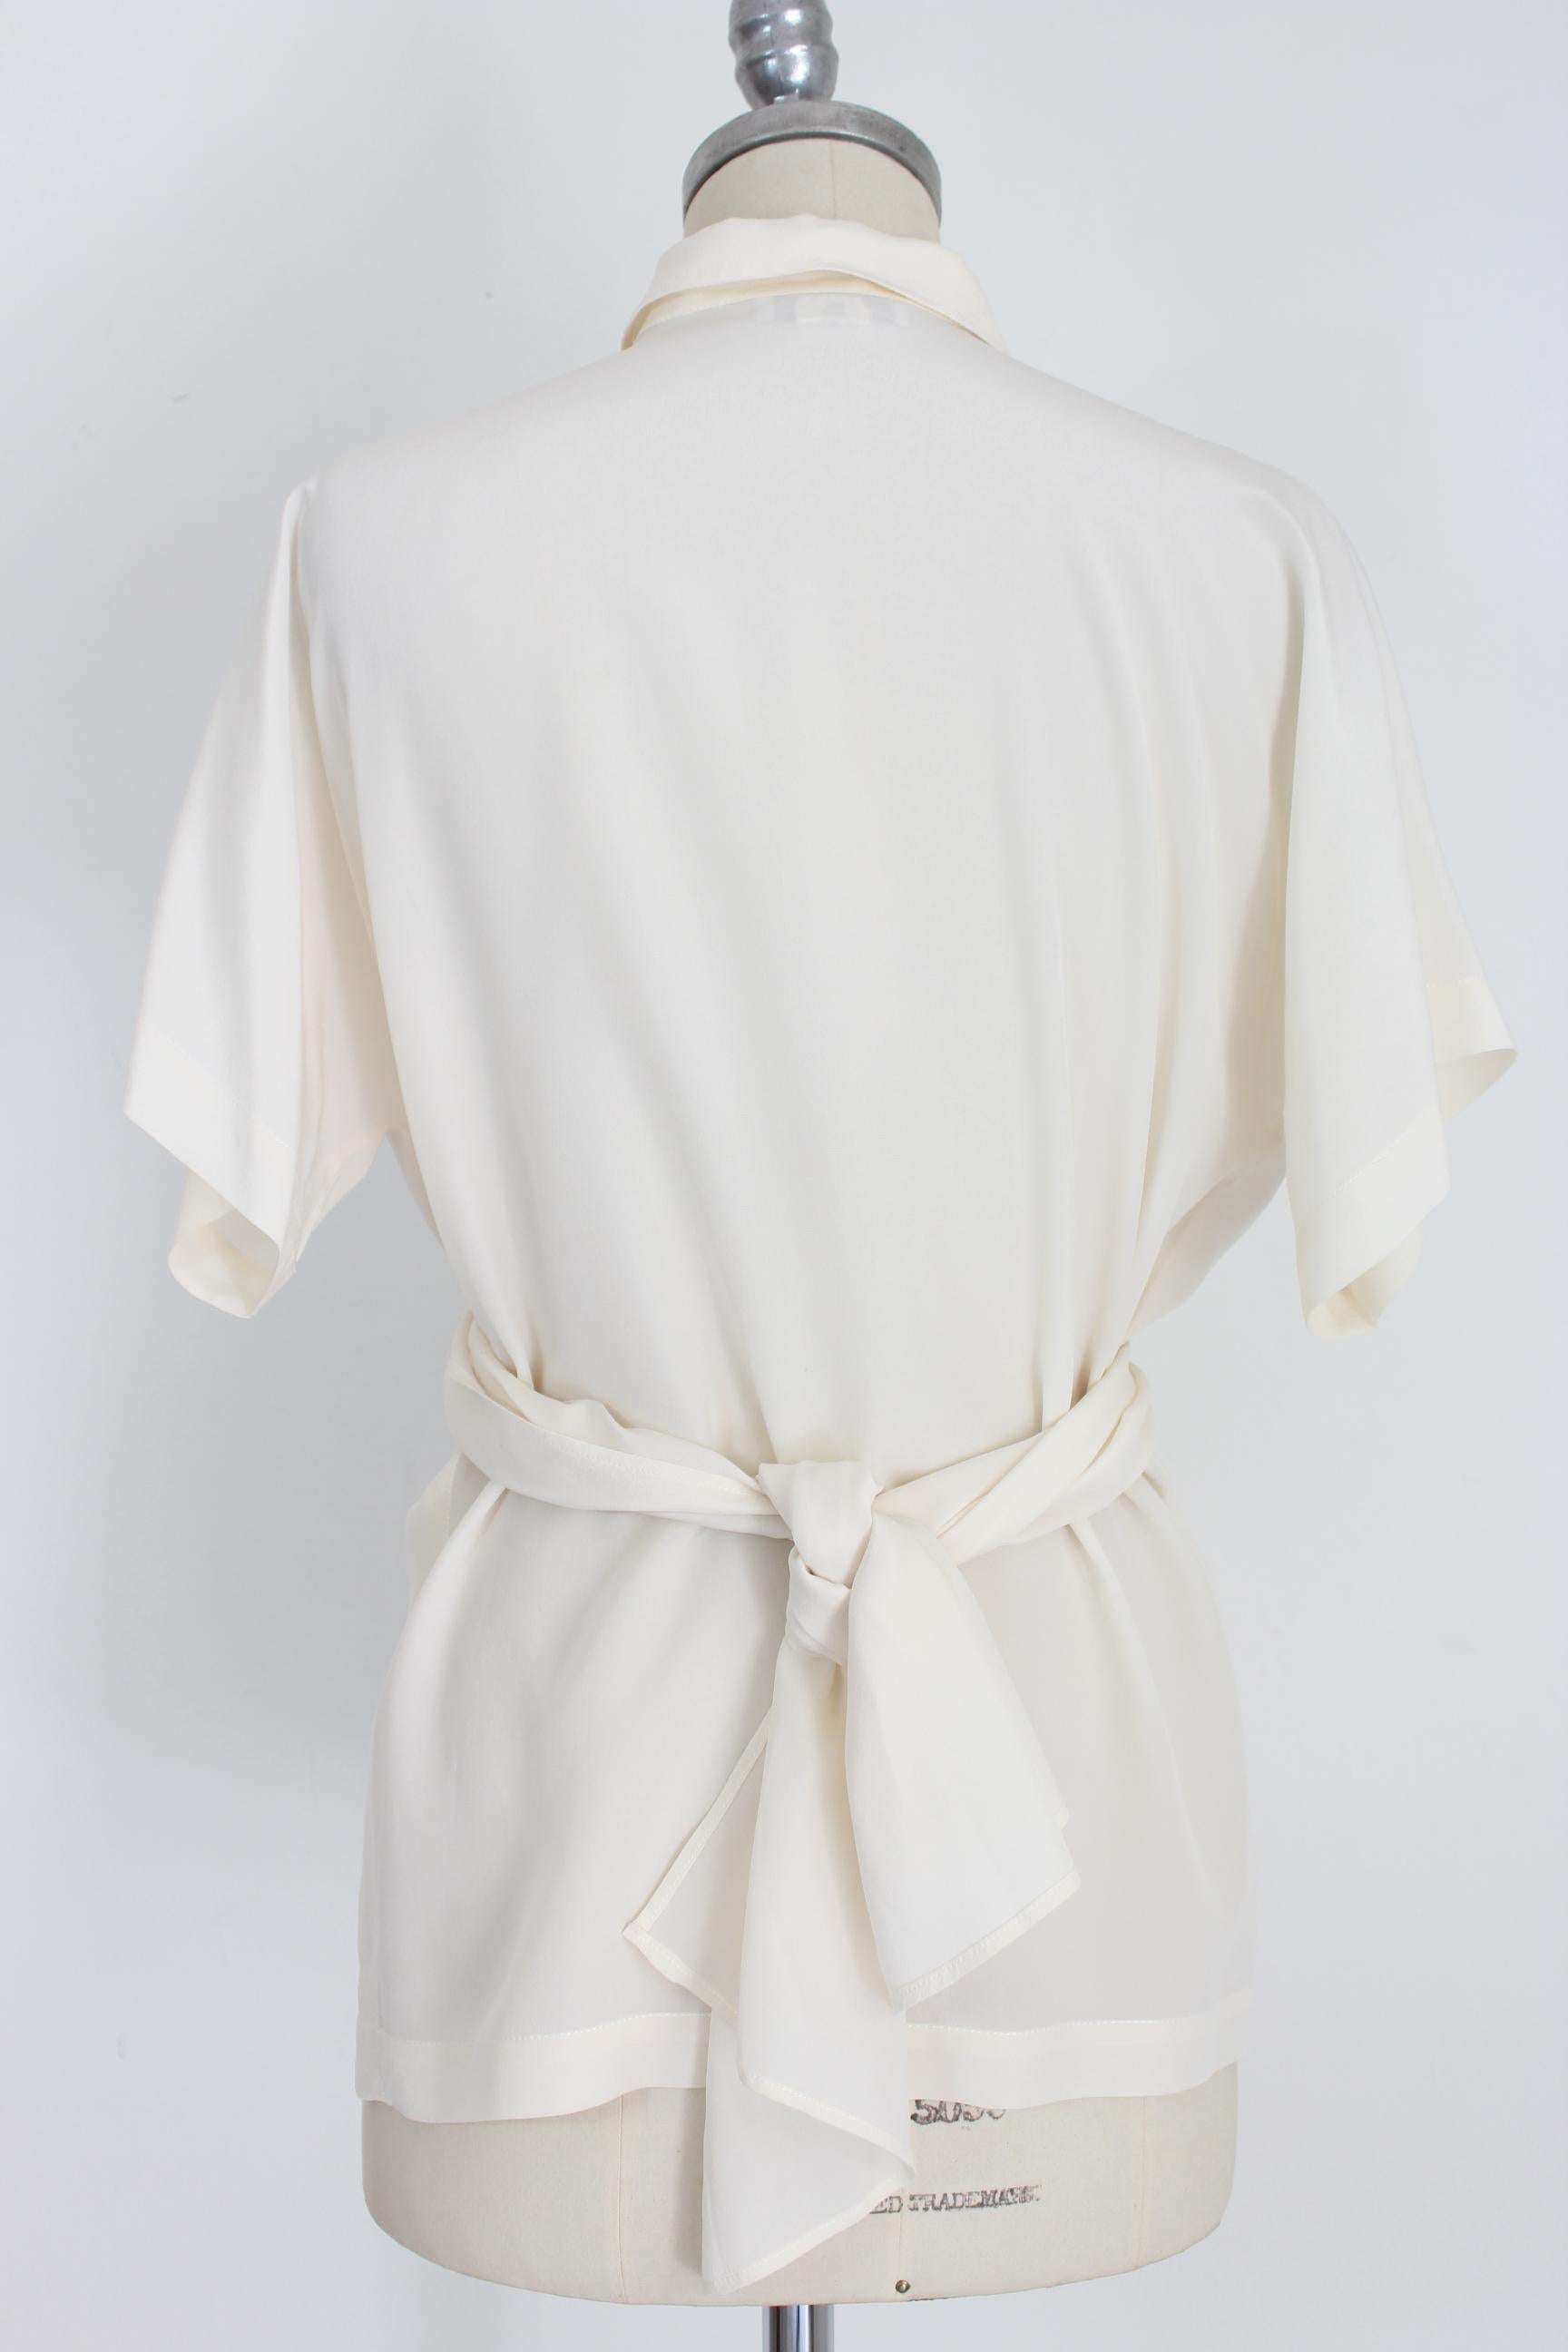 Genny by Gianni Versace 80s vintage women's shirt. Short model at the waist, soft belt closure at the waist. V-shaped neckline, short sleeves. Beige color, 100% silk. Made in Italy. Very good vintage condition, some small imperfections due to